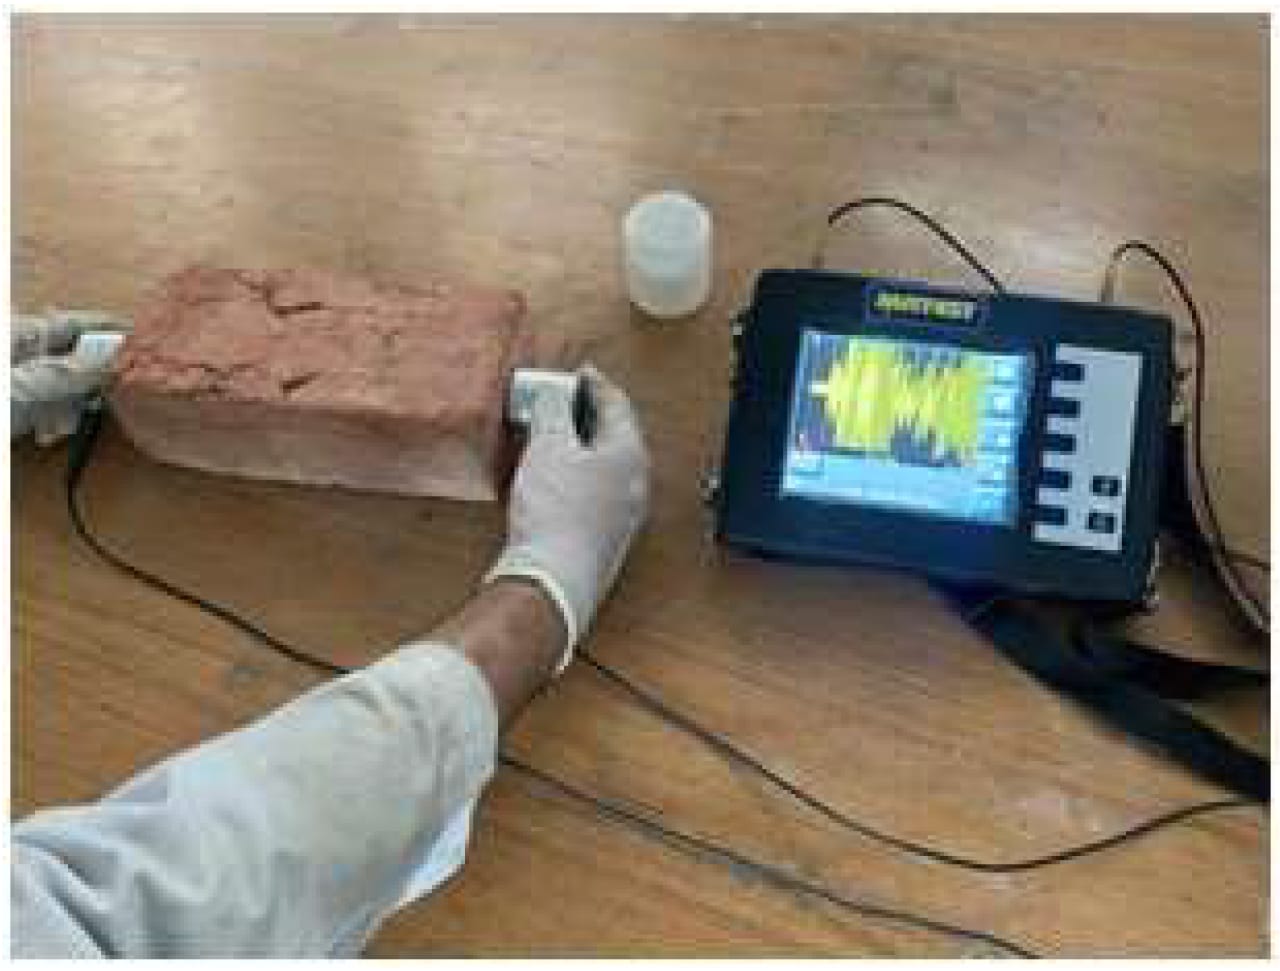 NON-DESTRUCTIVE TESTING (NDT) FOR DAMAGE ASSESSMENT OF OLD MASONRY STRUCTURES.